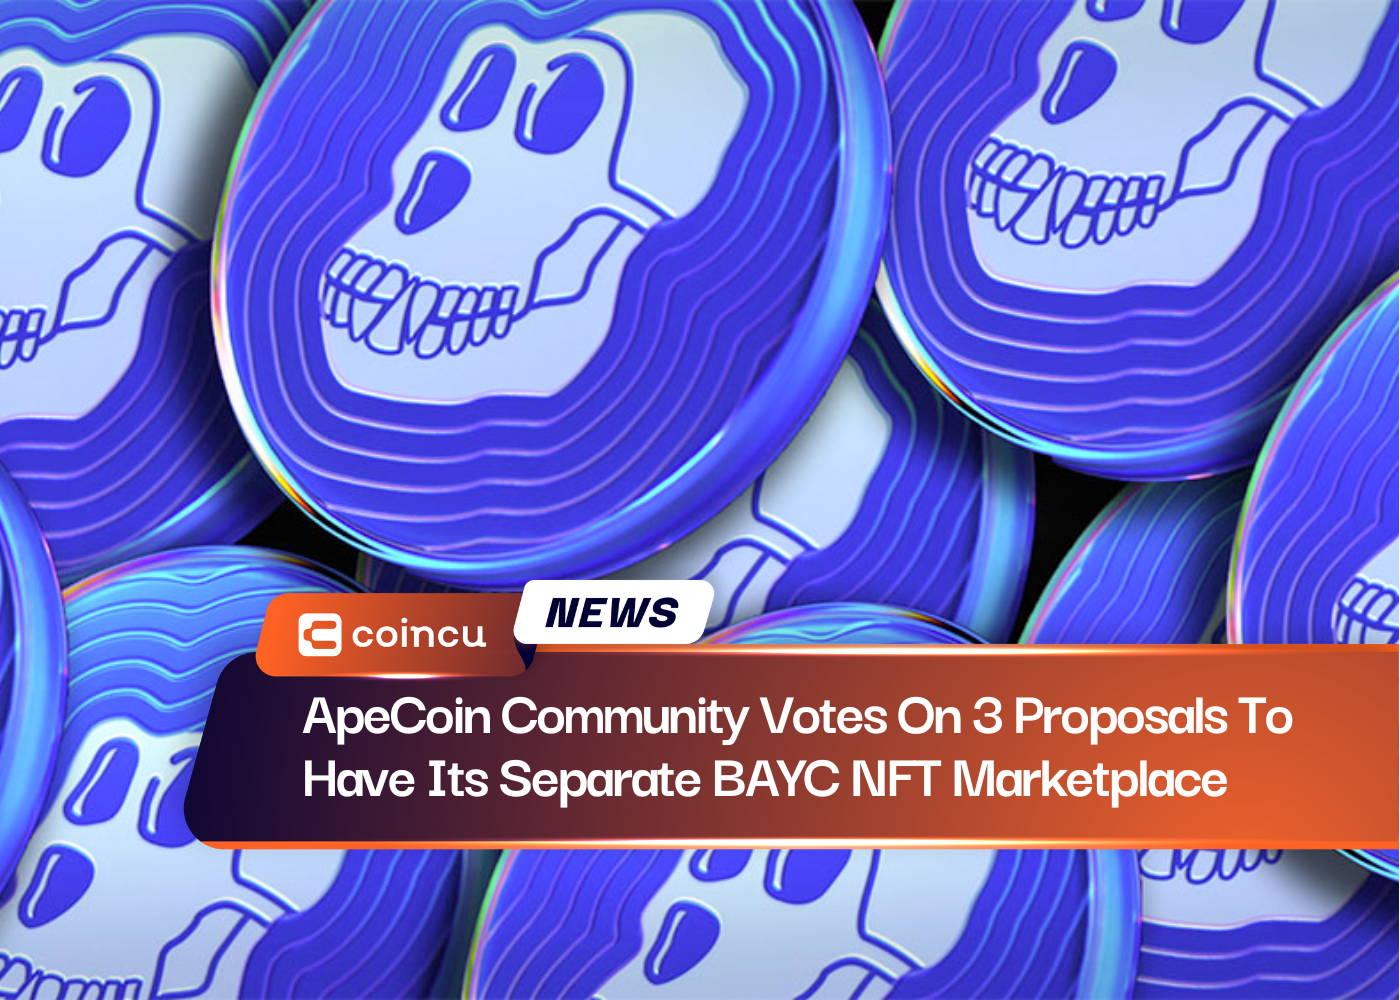 ApeCoin Community Votes On 3 Proposals To Have Its Separate BAYC NFT Marketplace